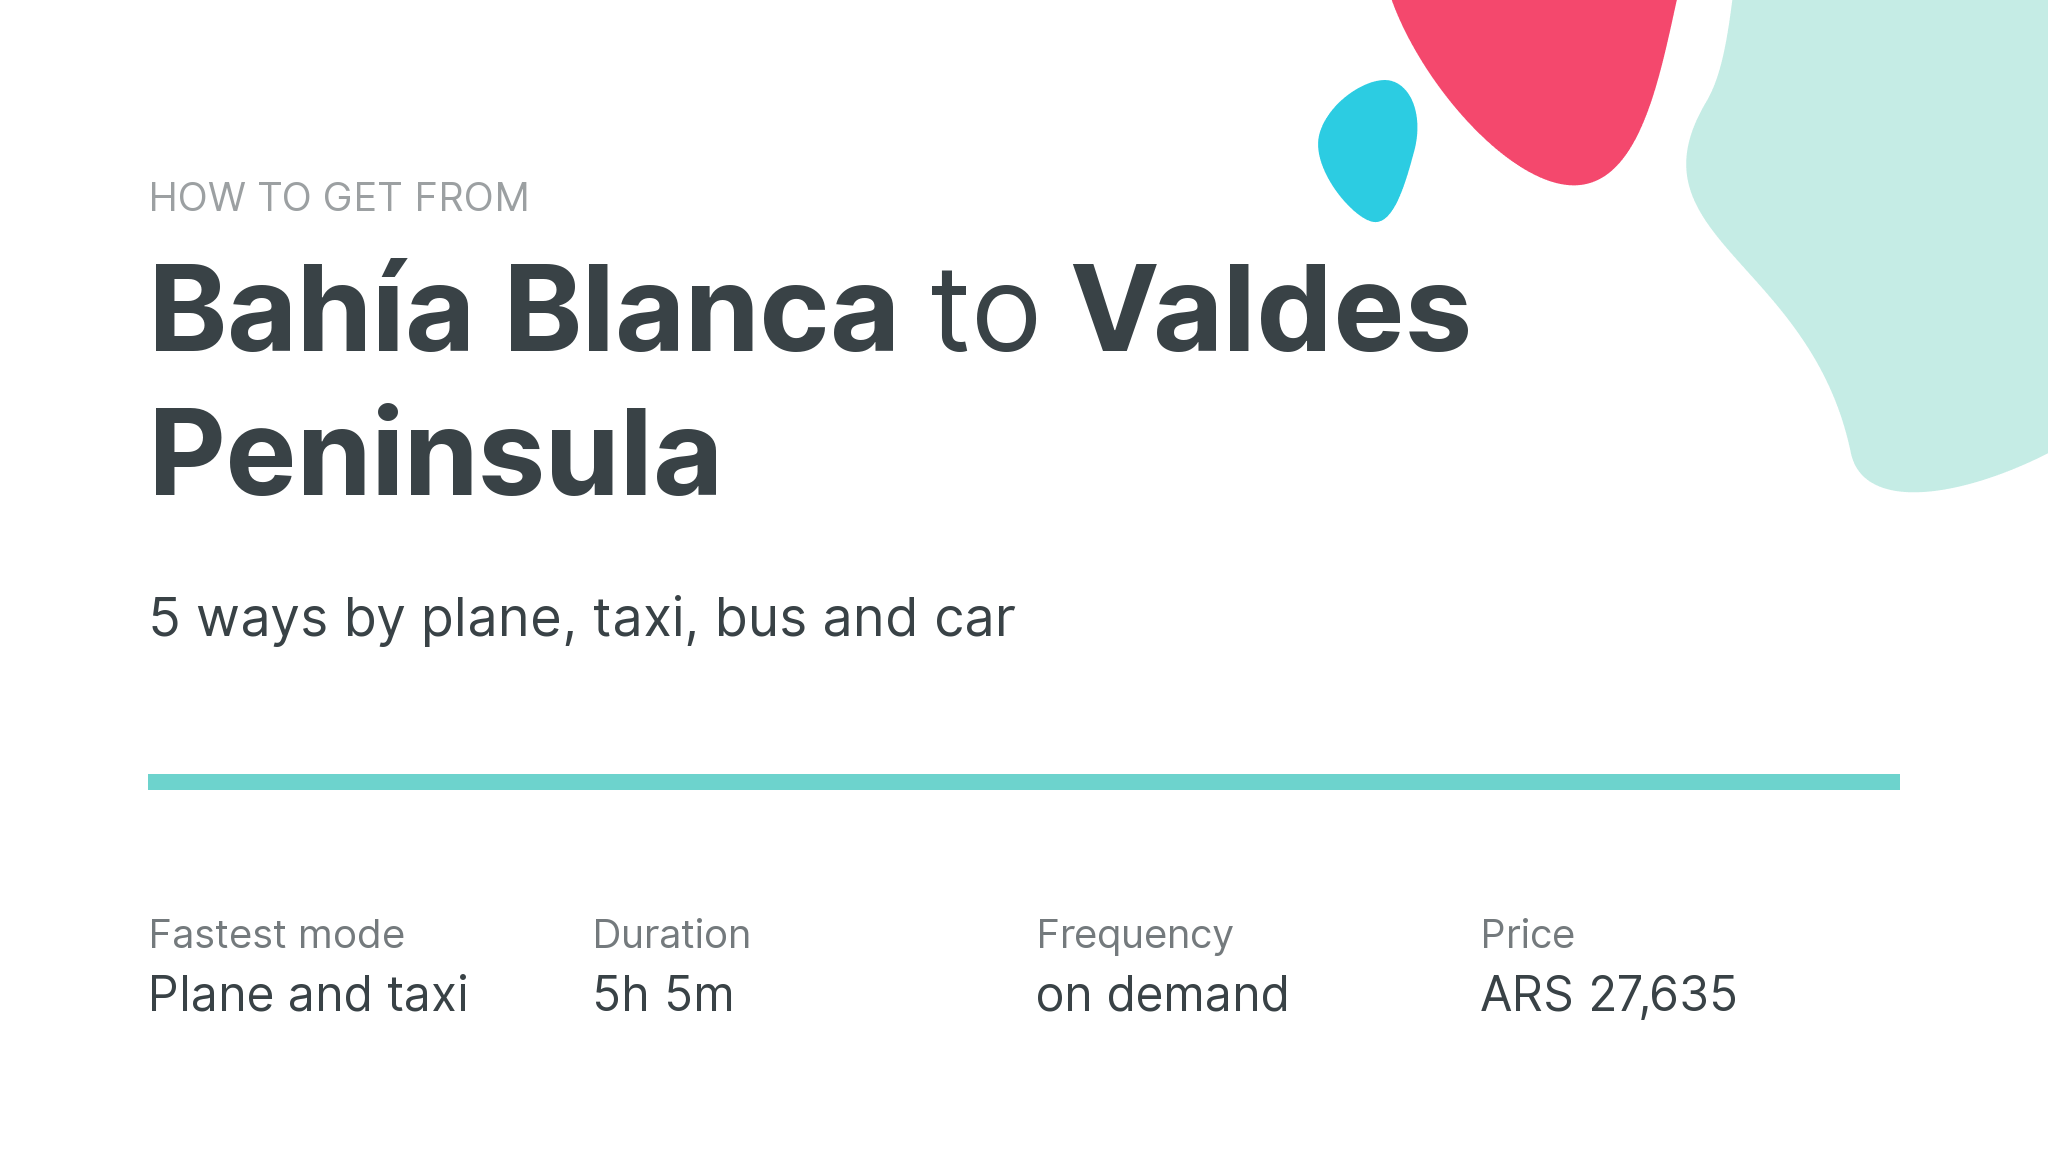 How do I get from Bahía Blanca to Valdes Peninsula